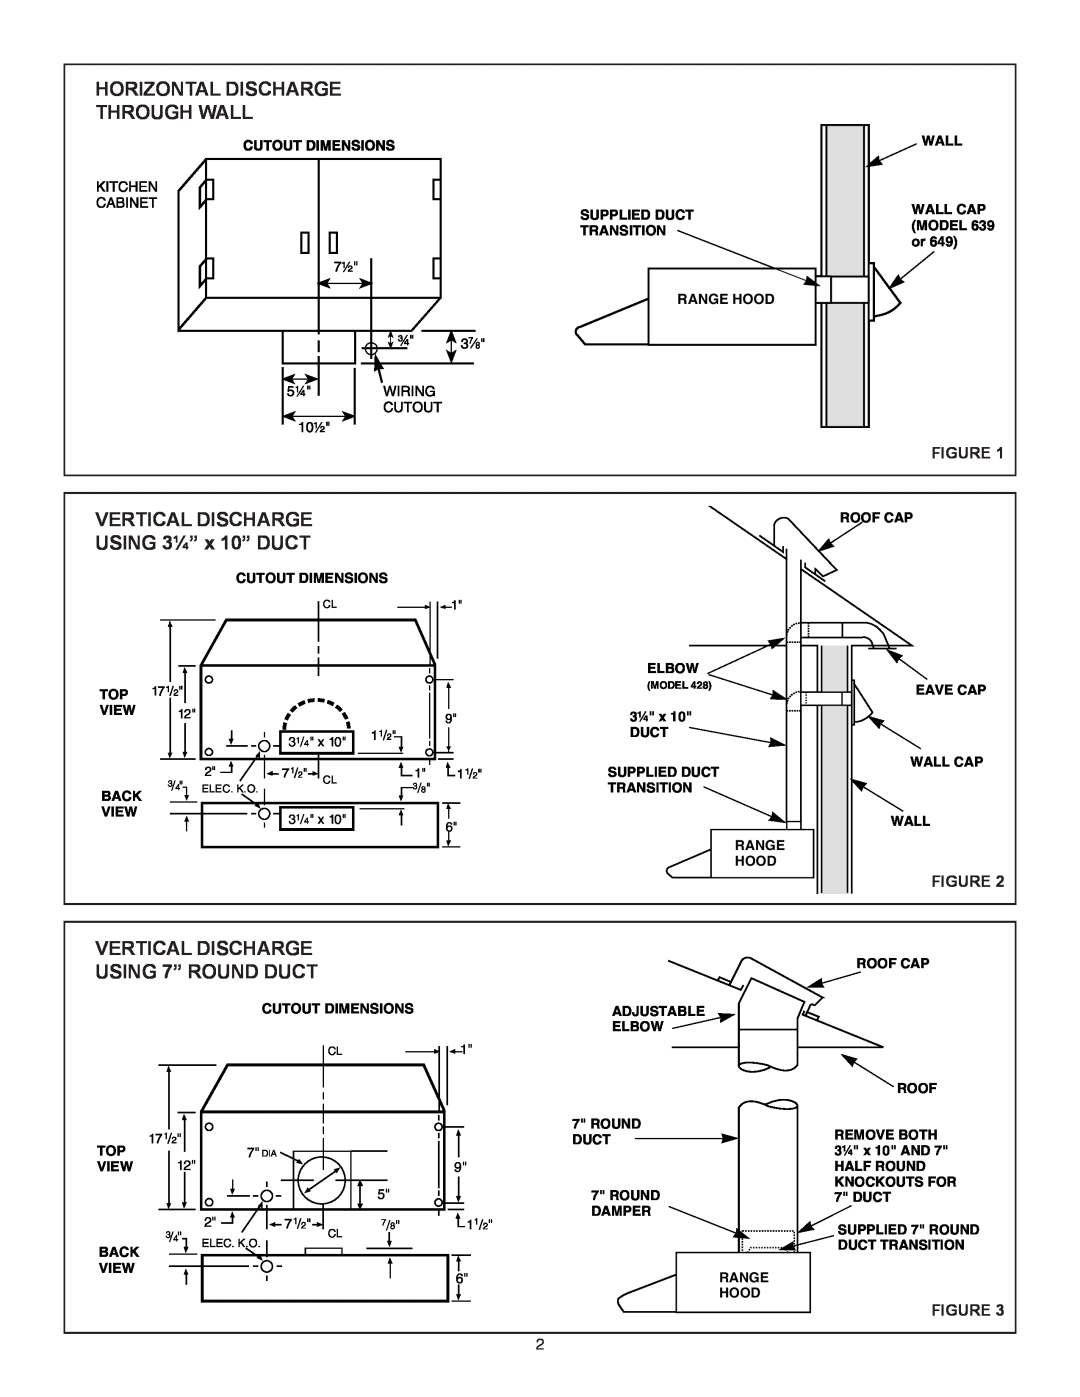 Broan QT230BL installation instructions Horizontal Discharge Through Wall, VERTICAL DISCHARGE USING 3¼” x 10” DUCT 